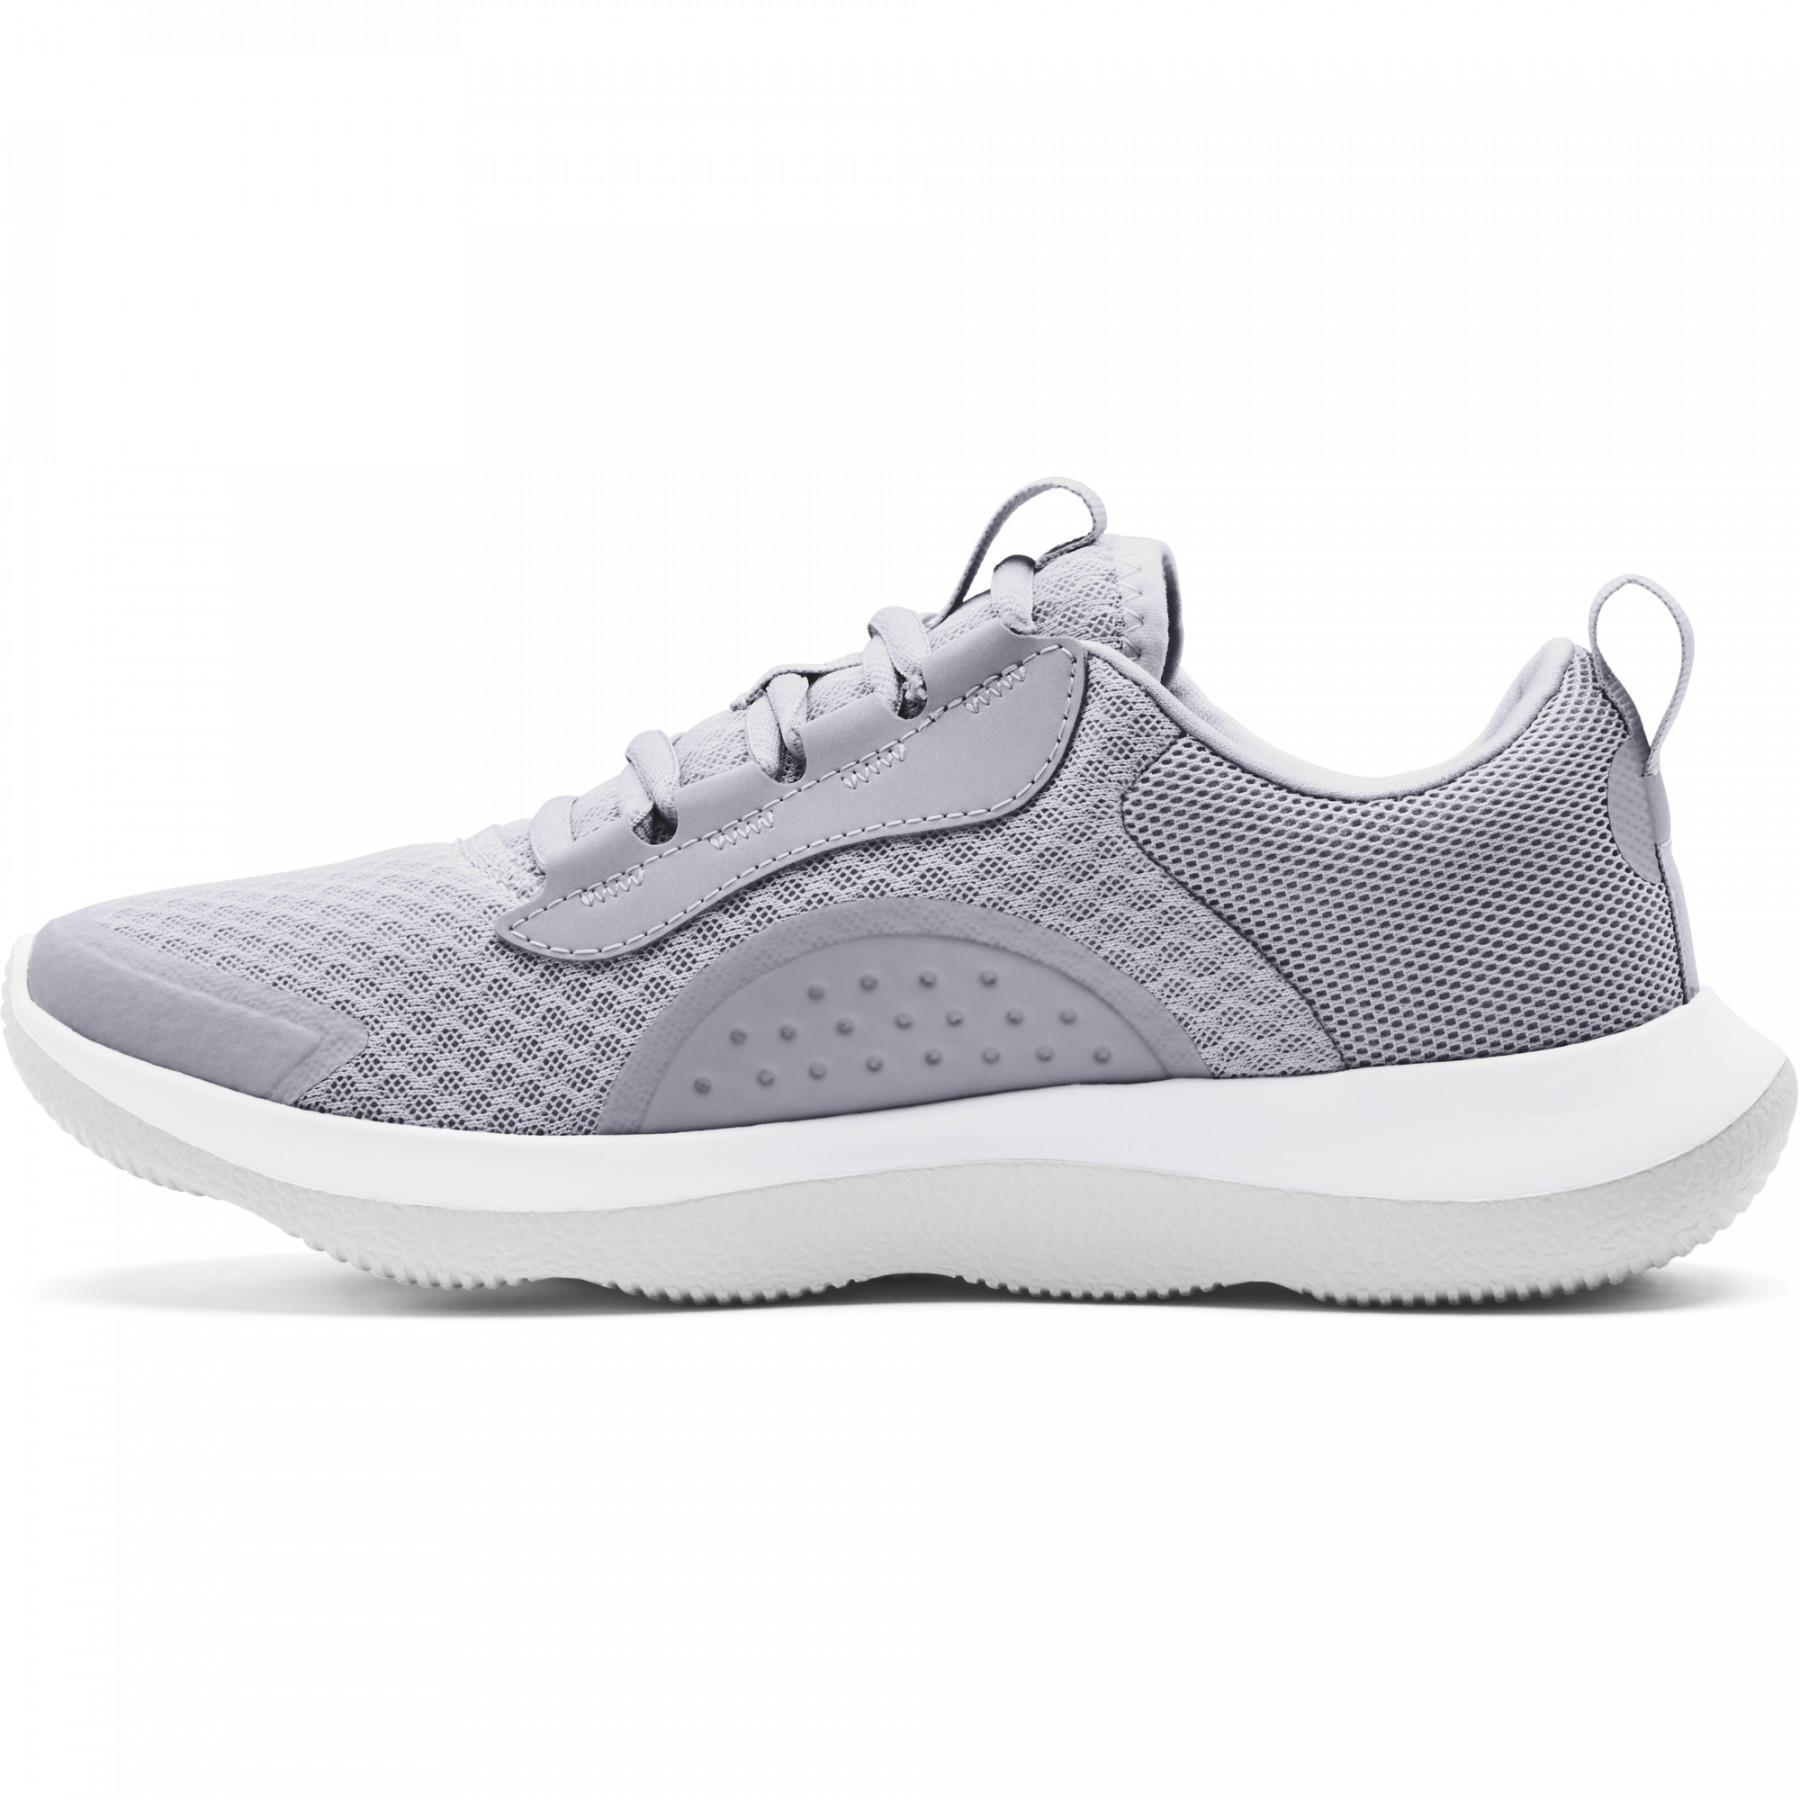 Chaussures femme Under Armour Victory